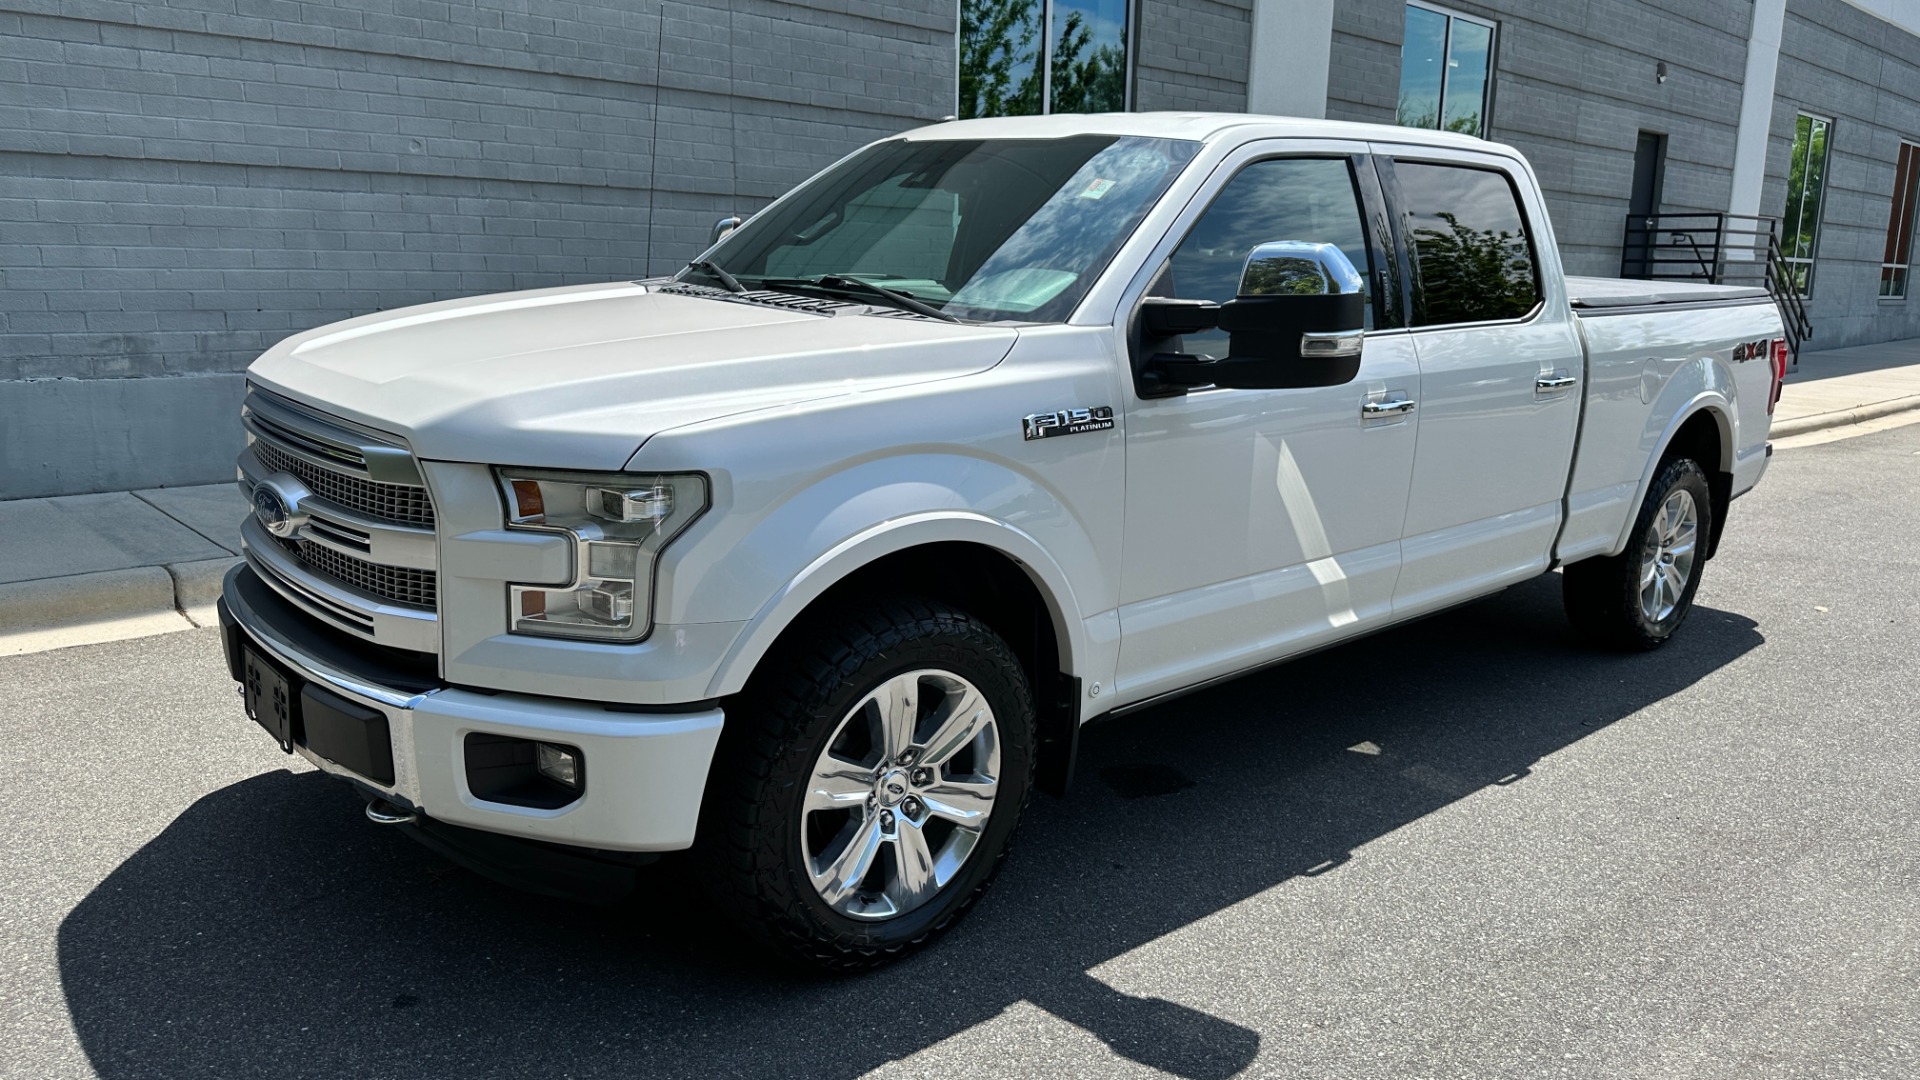 Used 2016 Ford F-150 PLATINUM / TECH PKG / BED COVER / LEATHER INTERIOR for sale $35,000 at Formula Imports in Charlotte NC 28227 2